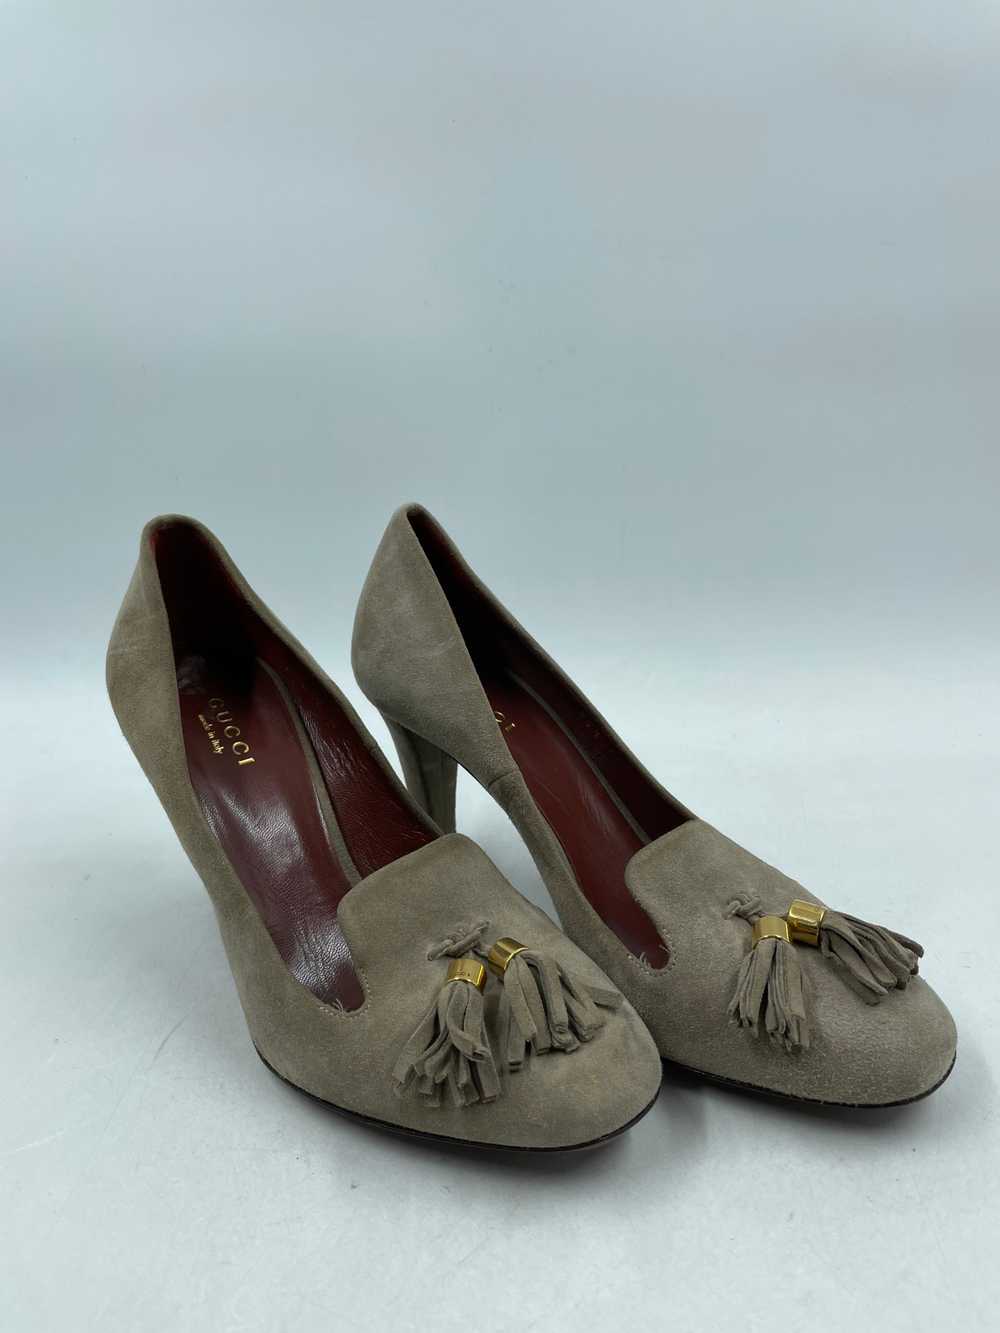 Authentic Gucci Taupe Tassel Pumps W 5.5 - image 3